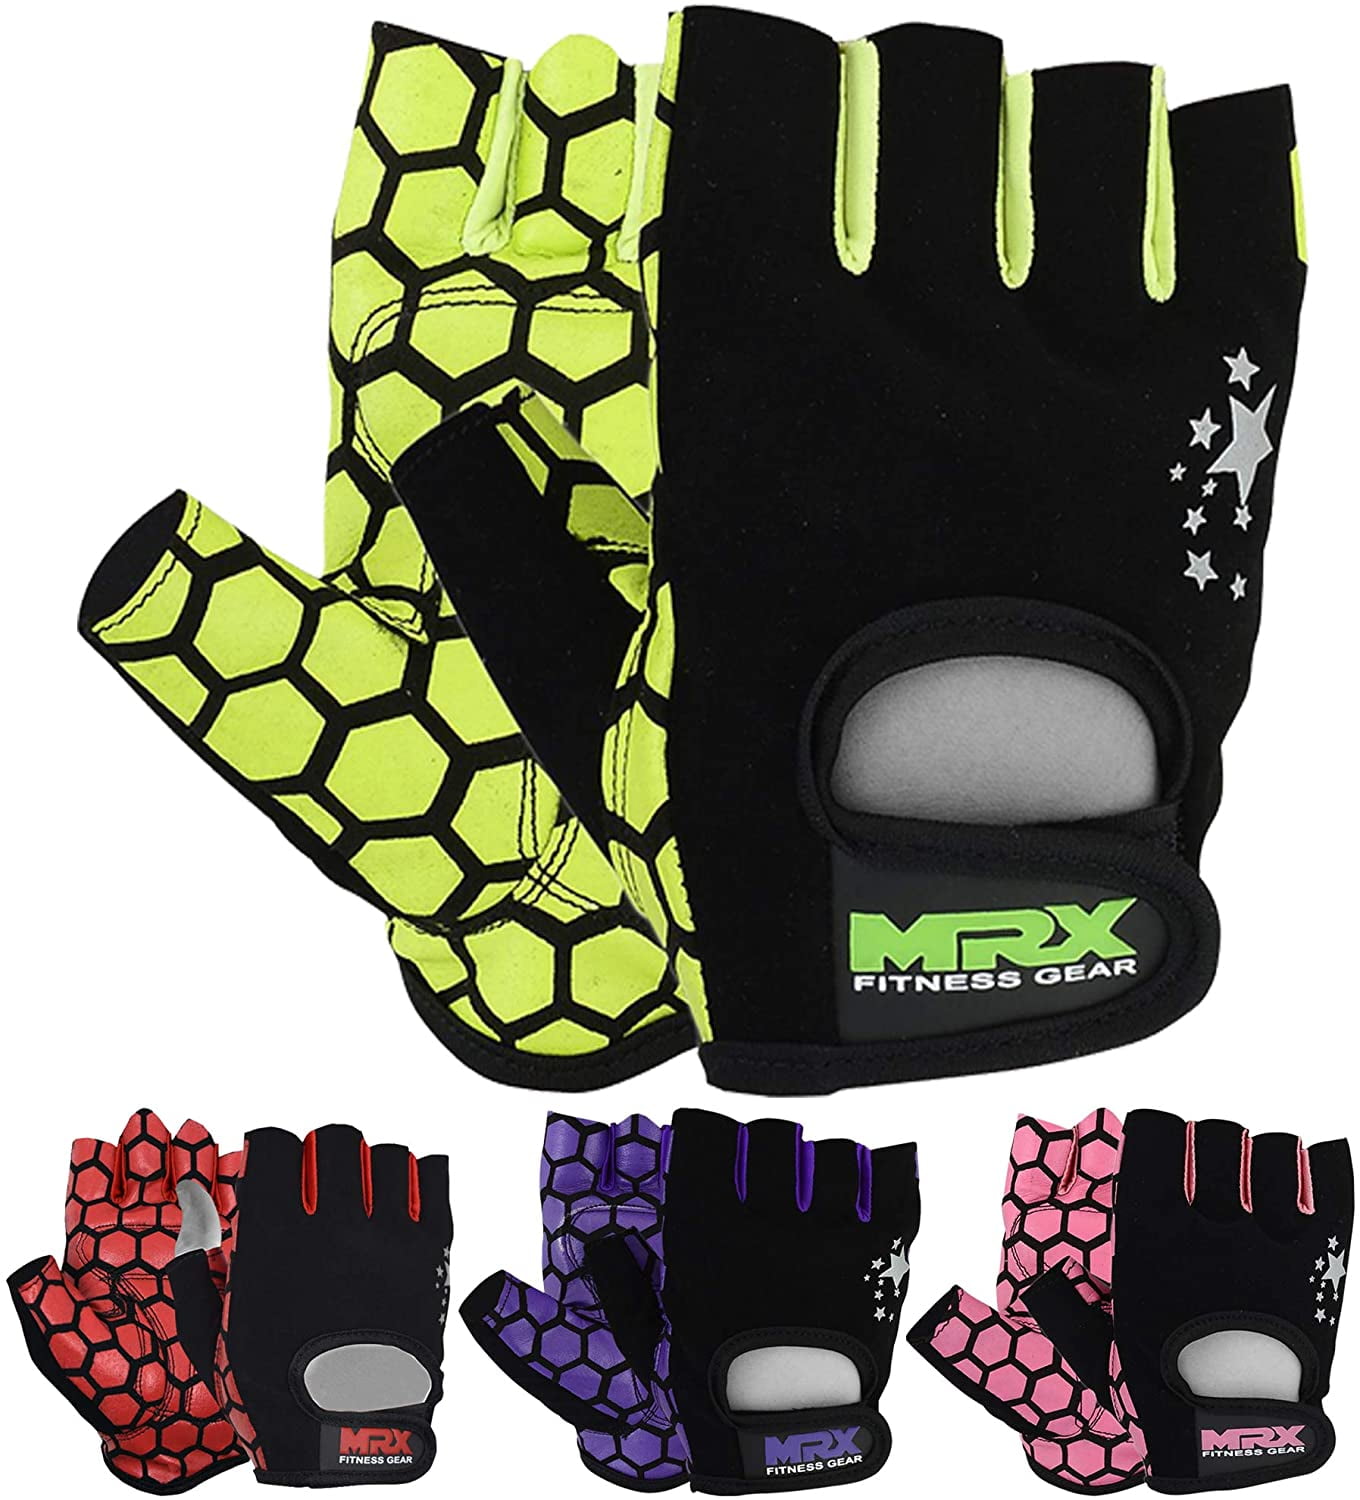 GYM GLOVES BODY BUILDING CROSSFIT TRAINING FITNESS WORKOUT WEIGHT LIFTING GLOVES 